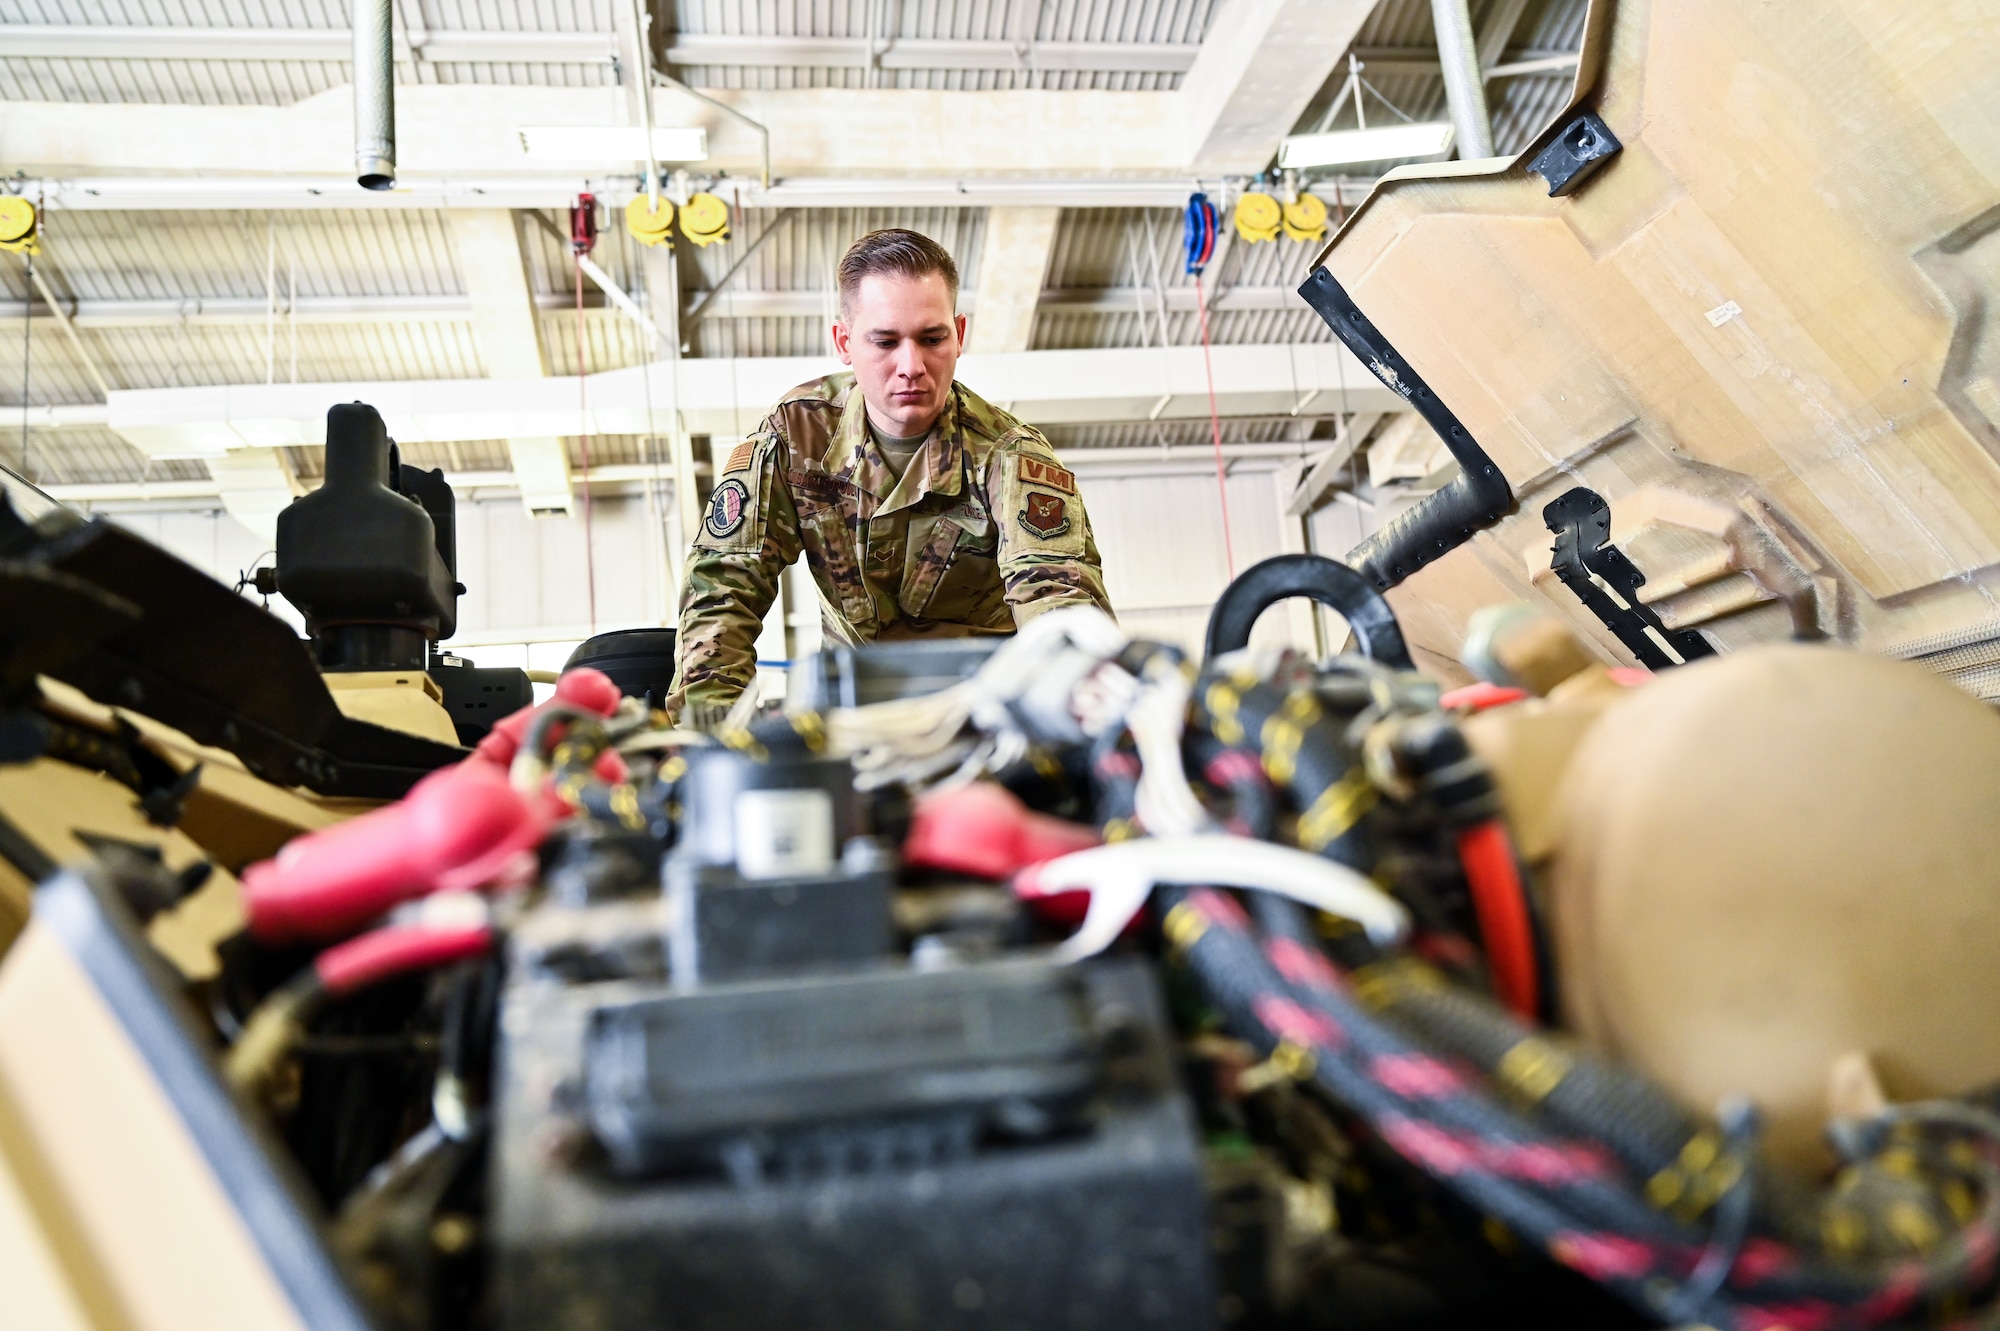 Senior Airman Korey Sarantopoulos, 90th Logistics Readiness Squadron vehicle maintenance journeyman, checks the electrical, brake, fuel, cooling and other systems for serviceability as part of a Joint Light Tactical Vehicle limited technical inspection at F.E. Warren Air Force Base, Wyoming, Oct 25, 2022. The 90 LRS is tasked with preparing the next generation of security forces vehicles sent to protect the 90th Missile Wing's ICBM system as part of Air Force Global Strike Command’s priority to modernize. (U.S. Air Force photo by Joseph Coslett)